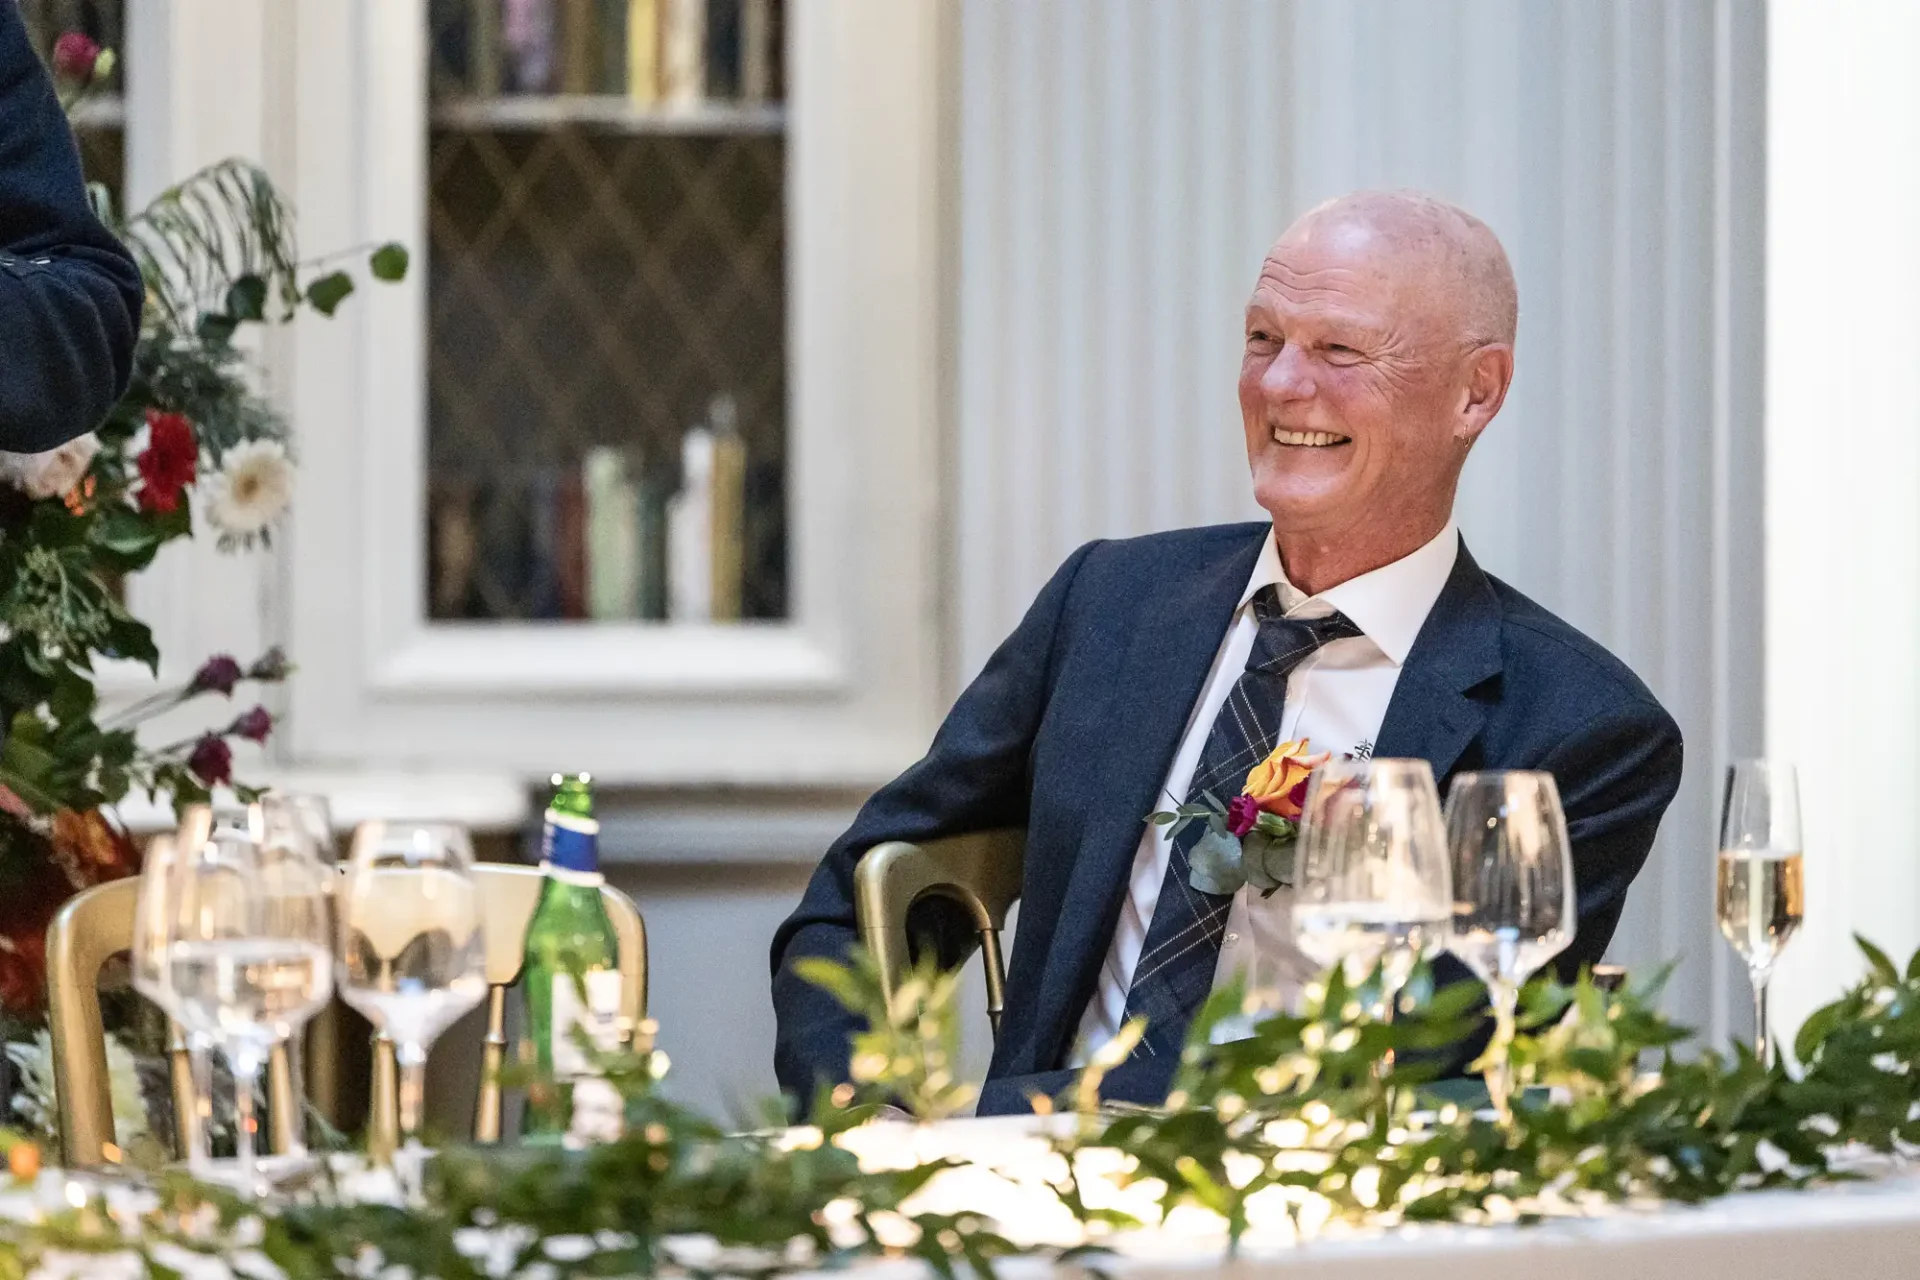 An elderly man in a suit, laughing at a formal dinner table adorned with flowers and wine glasses.